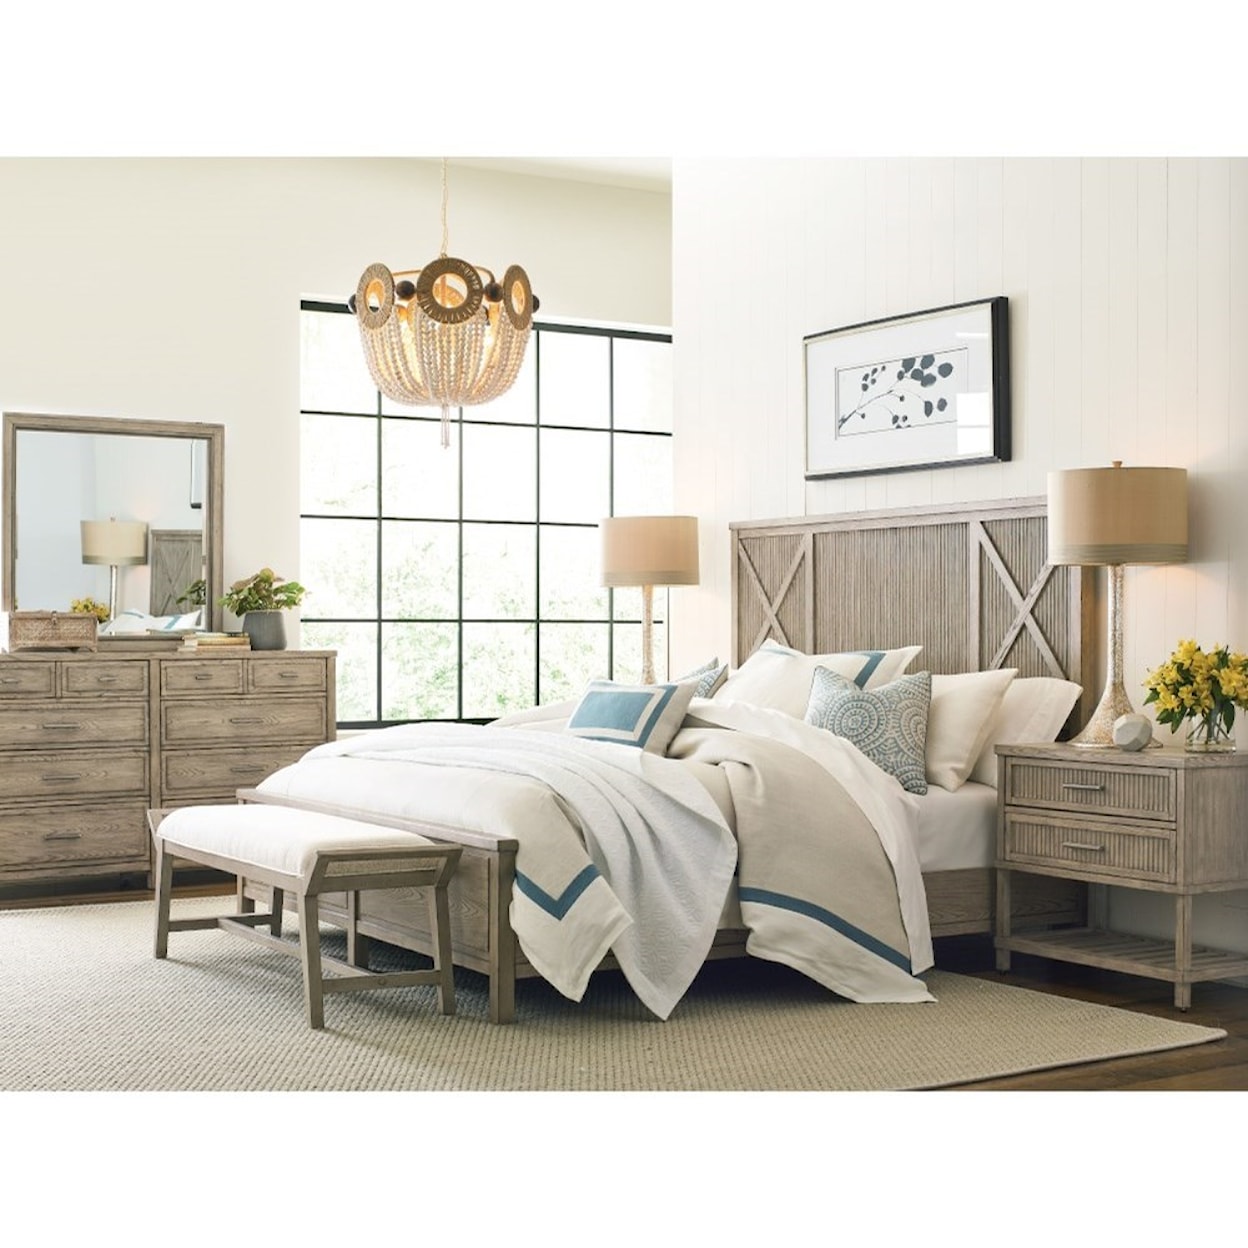 American Drew West Fork Canton California King Panel Bed